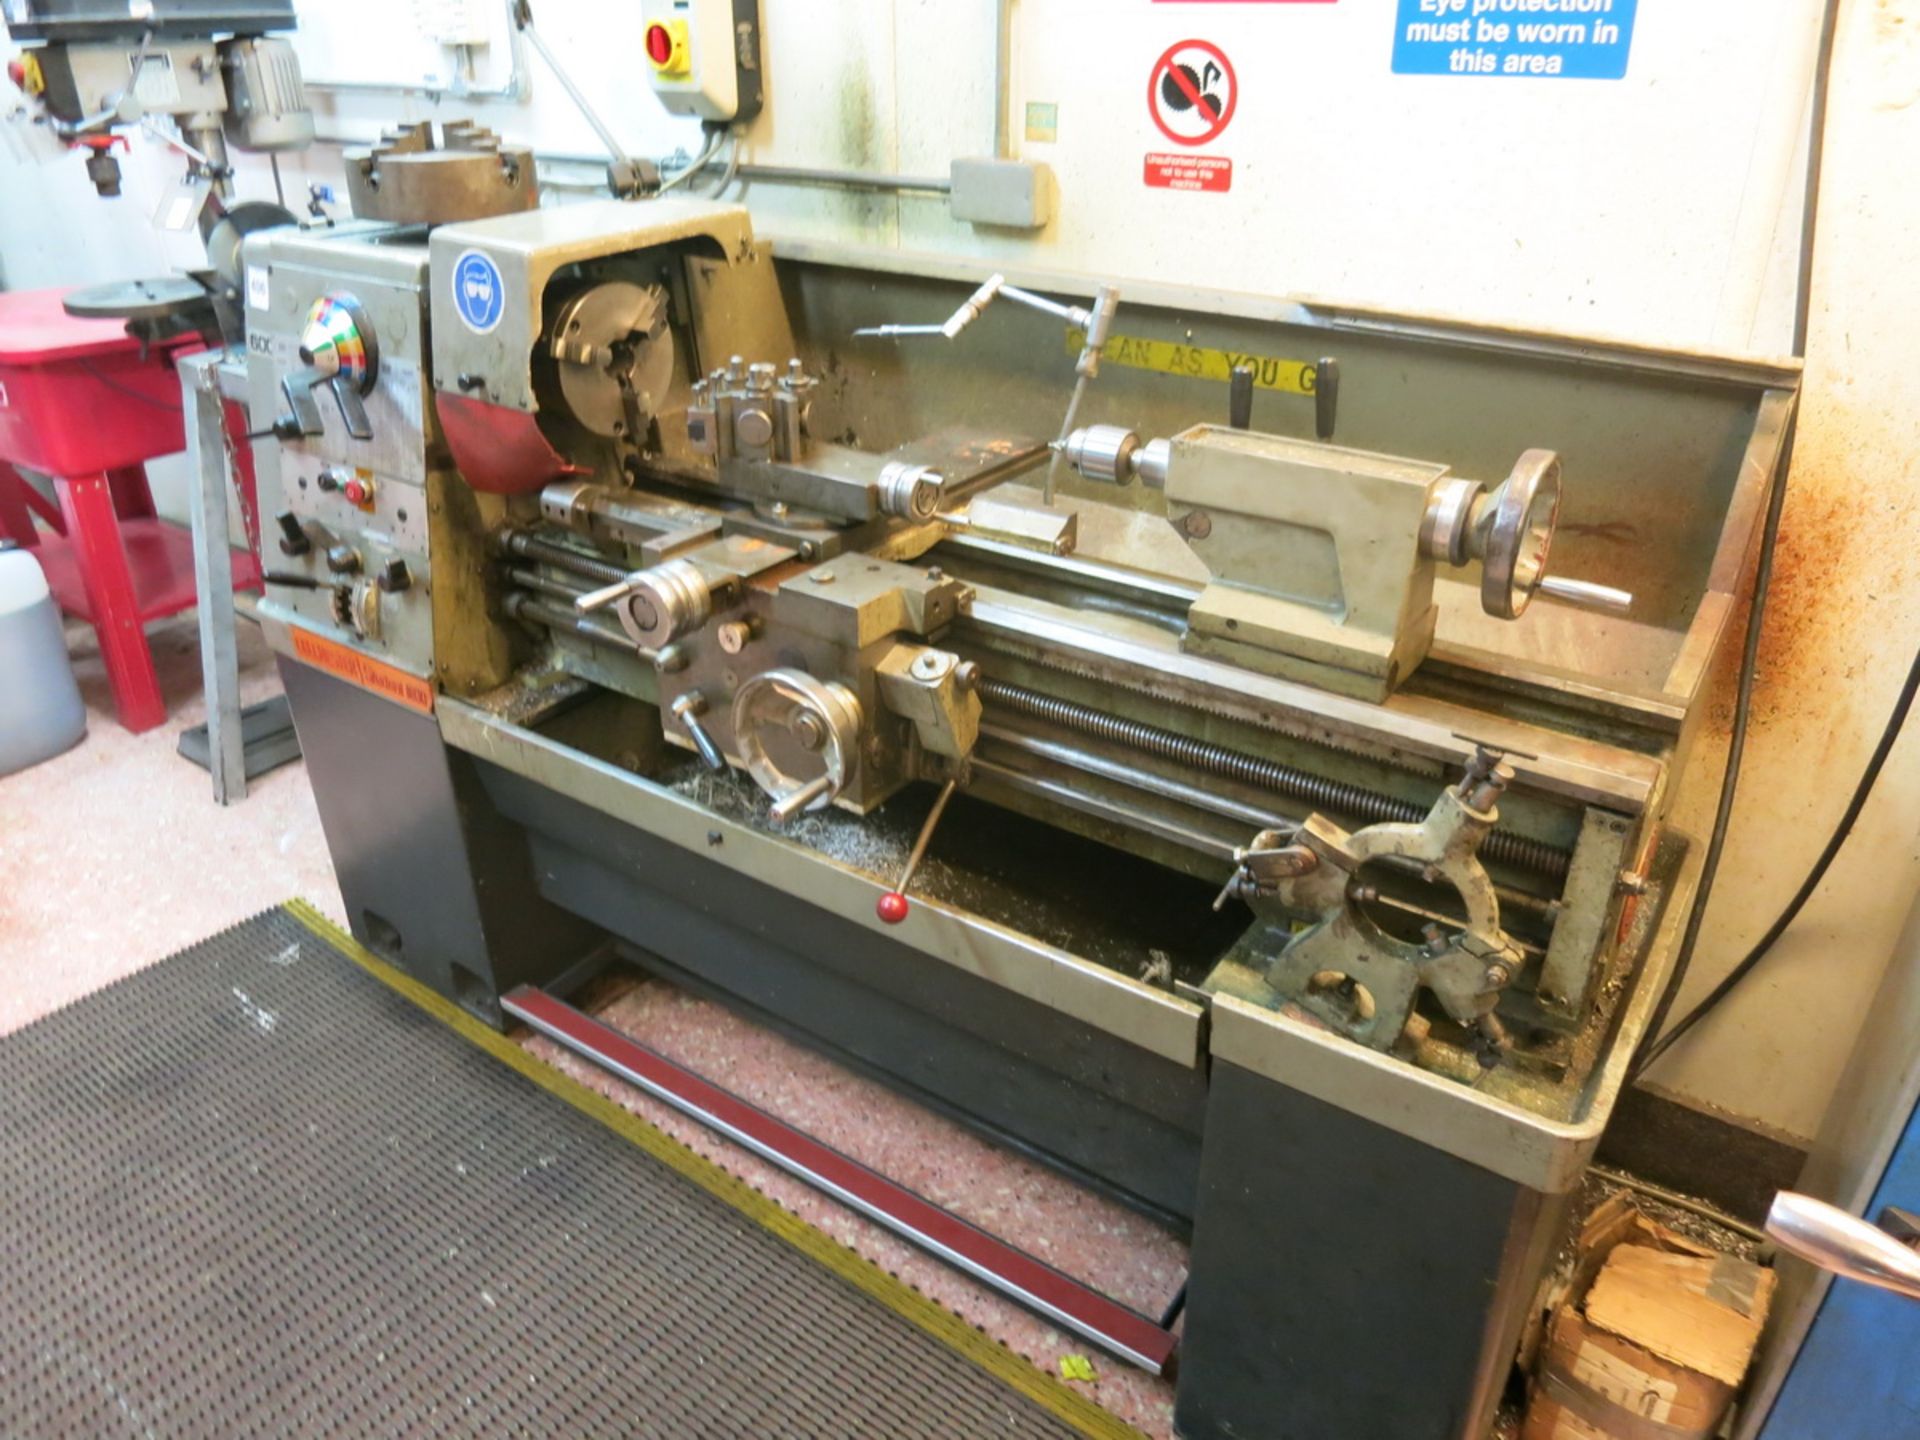 Colchester lathe, model Student 1800, s/n 4/0010/04426, with DRO LIFT OUT CHARGE  £150